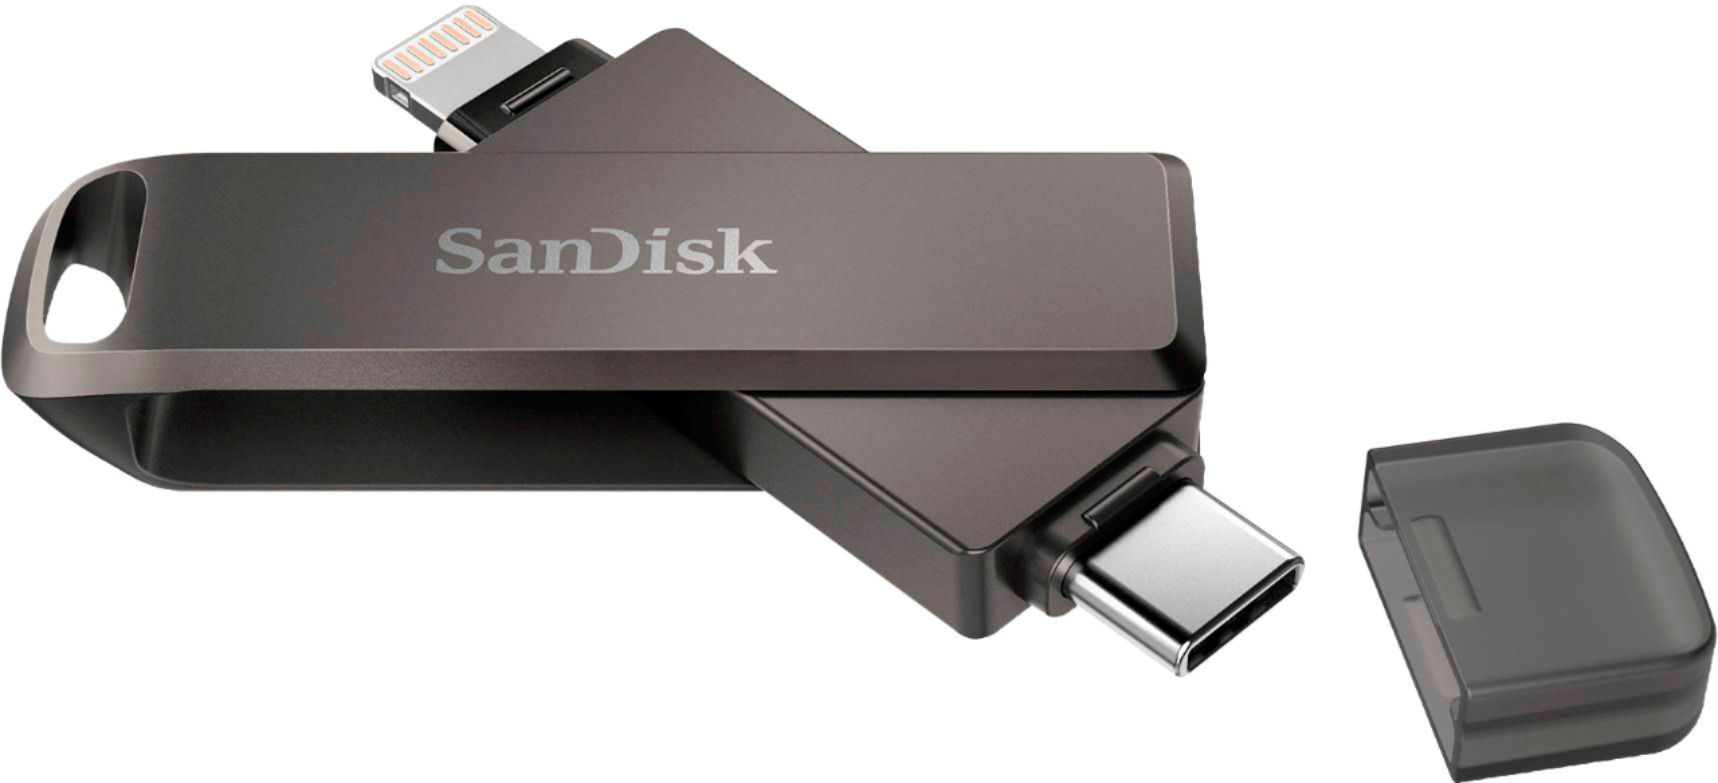 SanDisk 64GB iXpand Flash Drive Luxe for iPhone Lightning and Type 